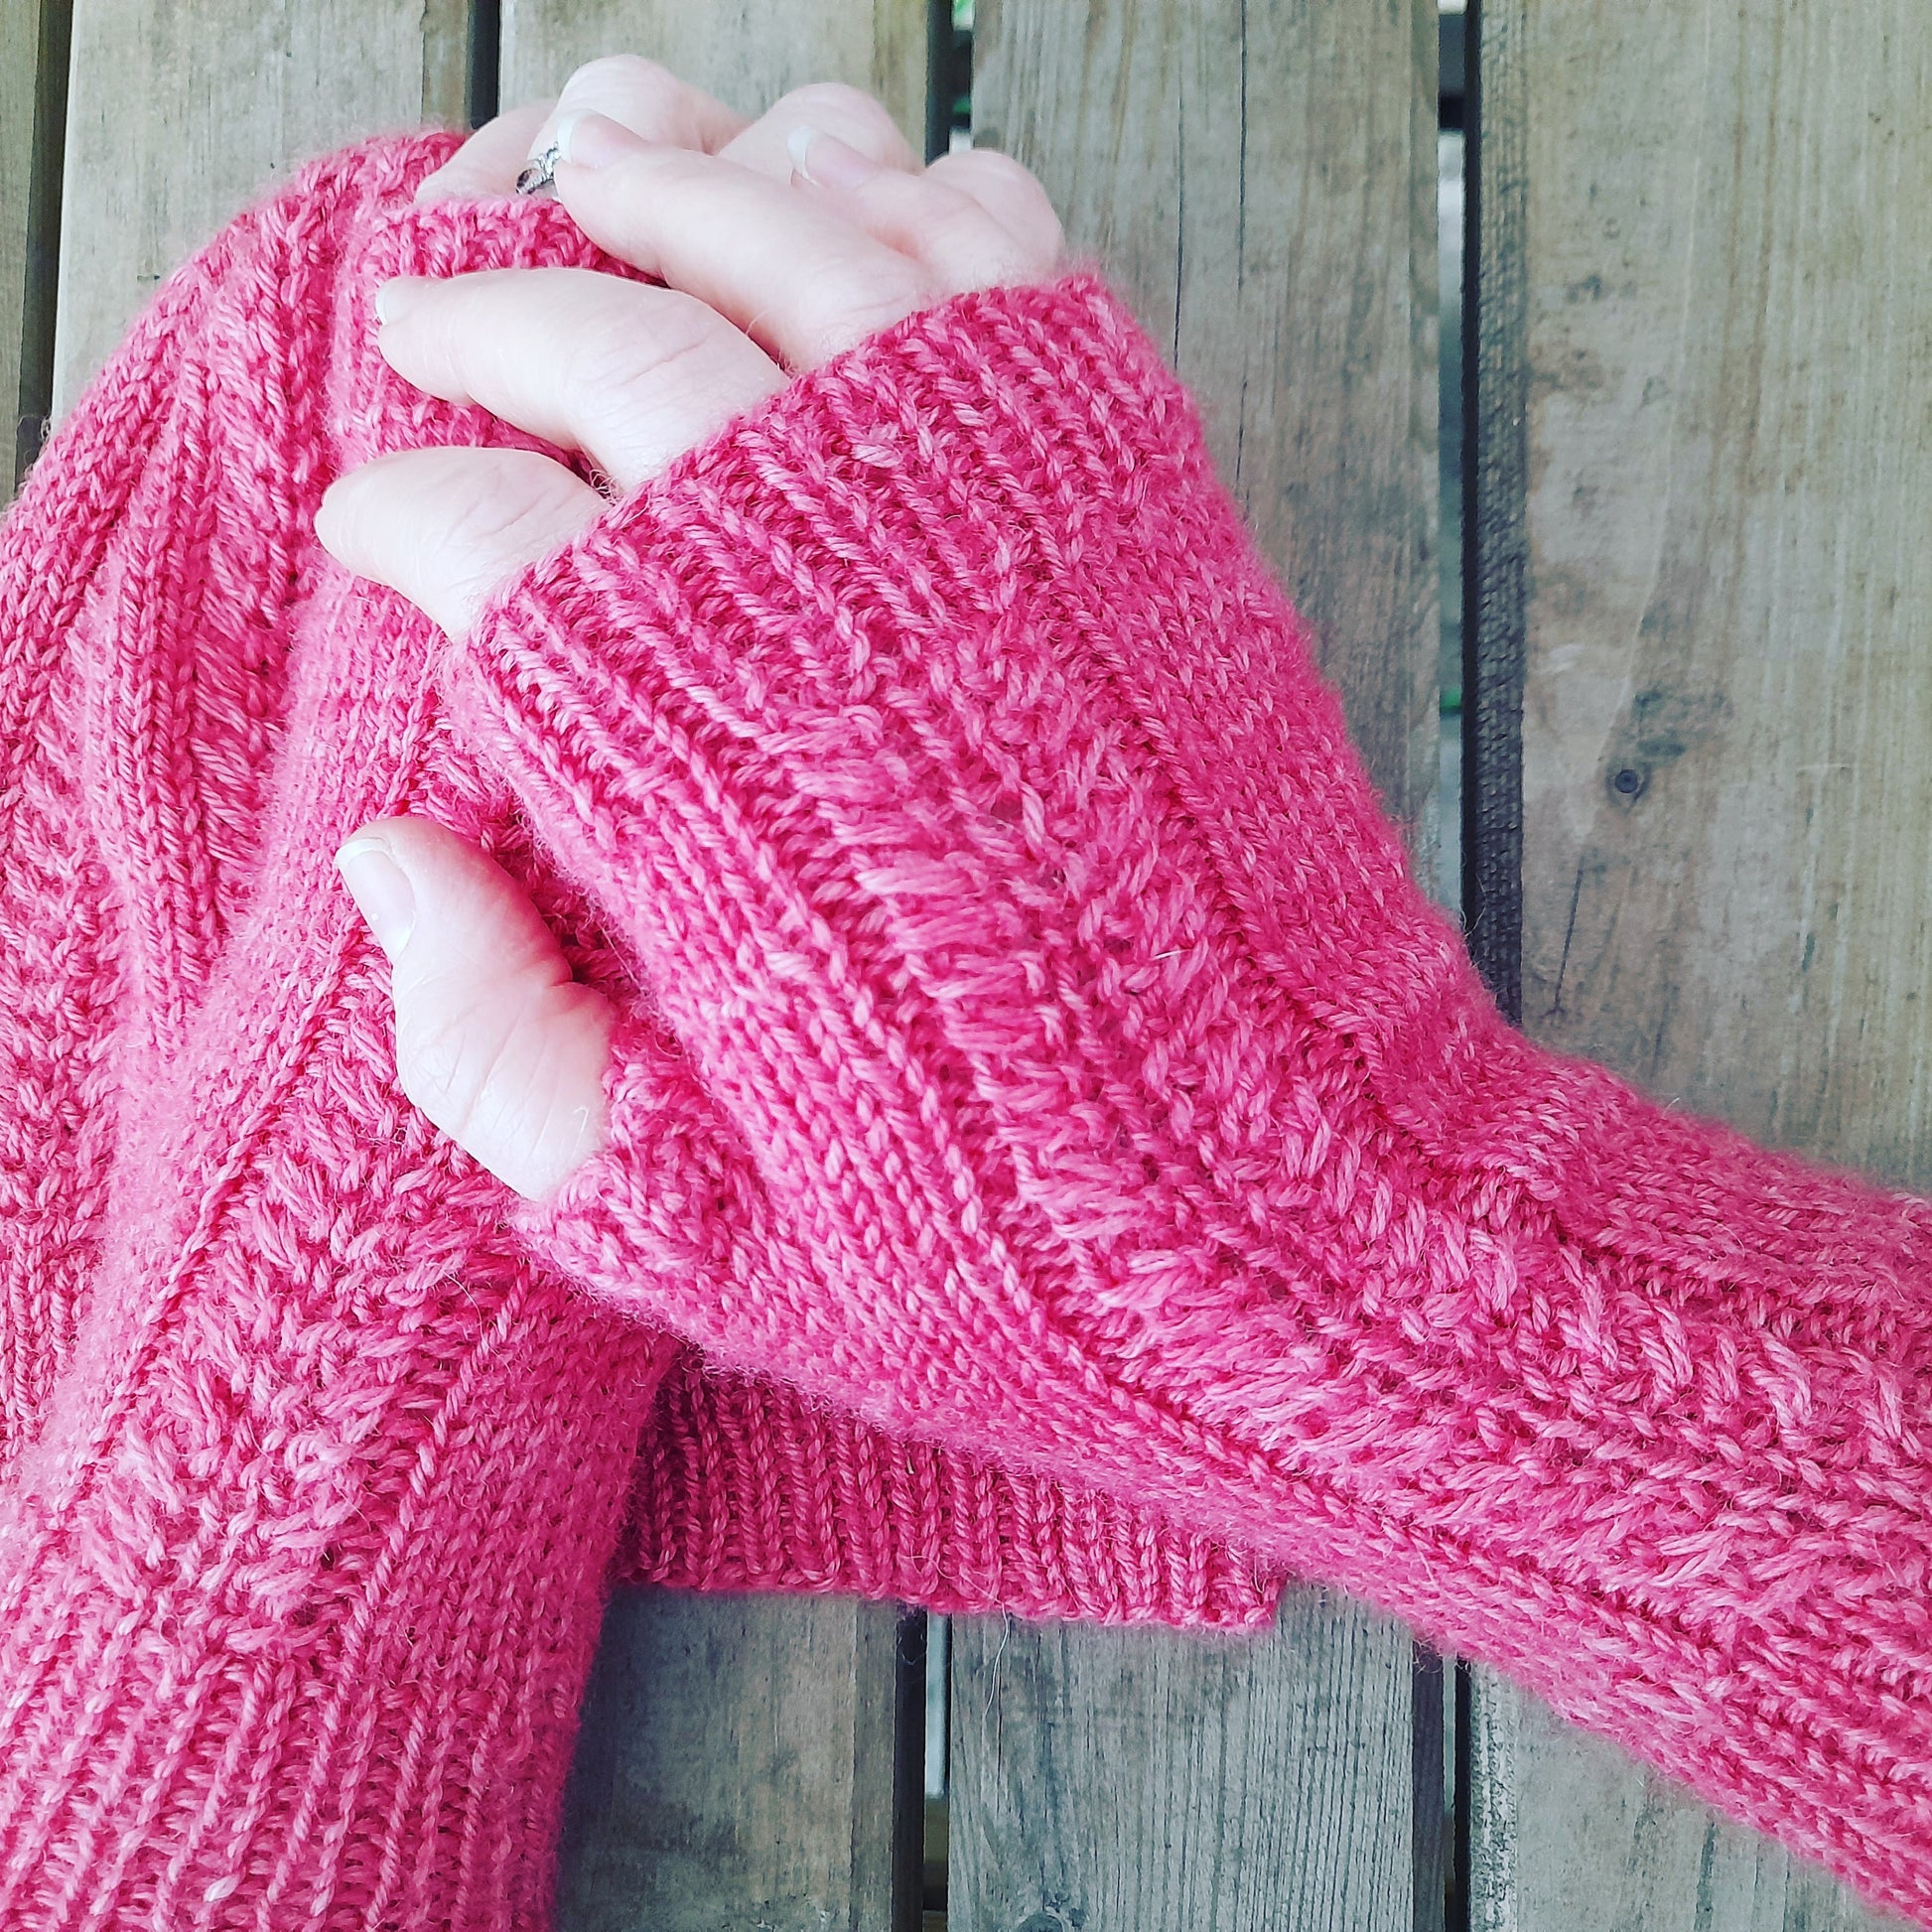 Easy cable knit fingerless gloves